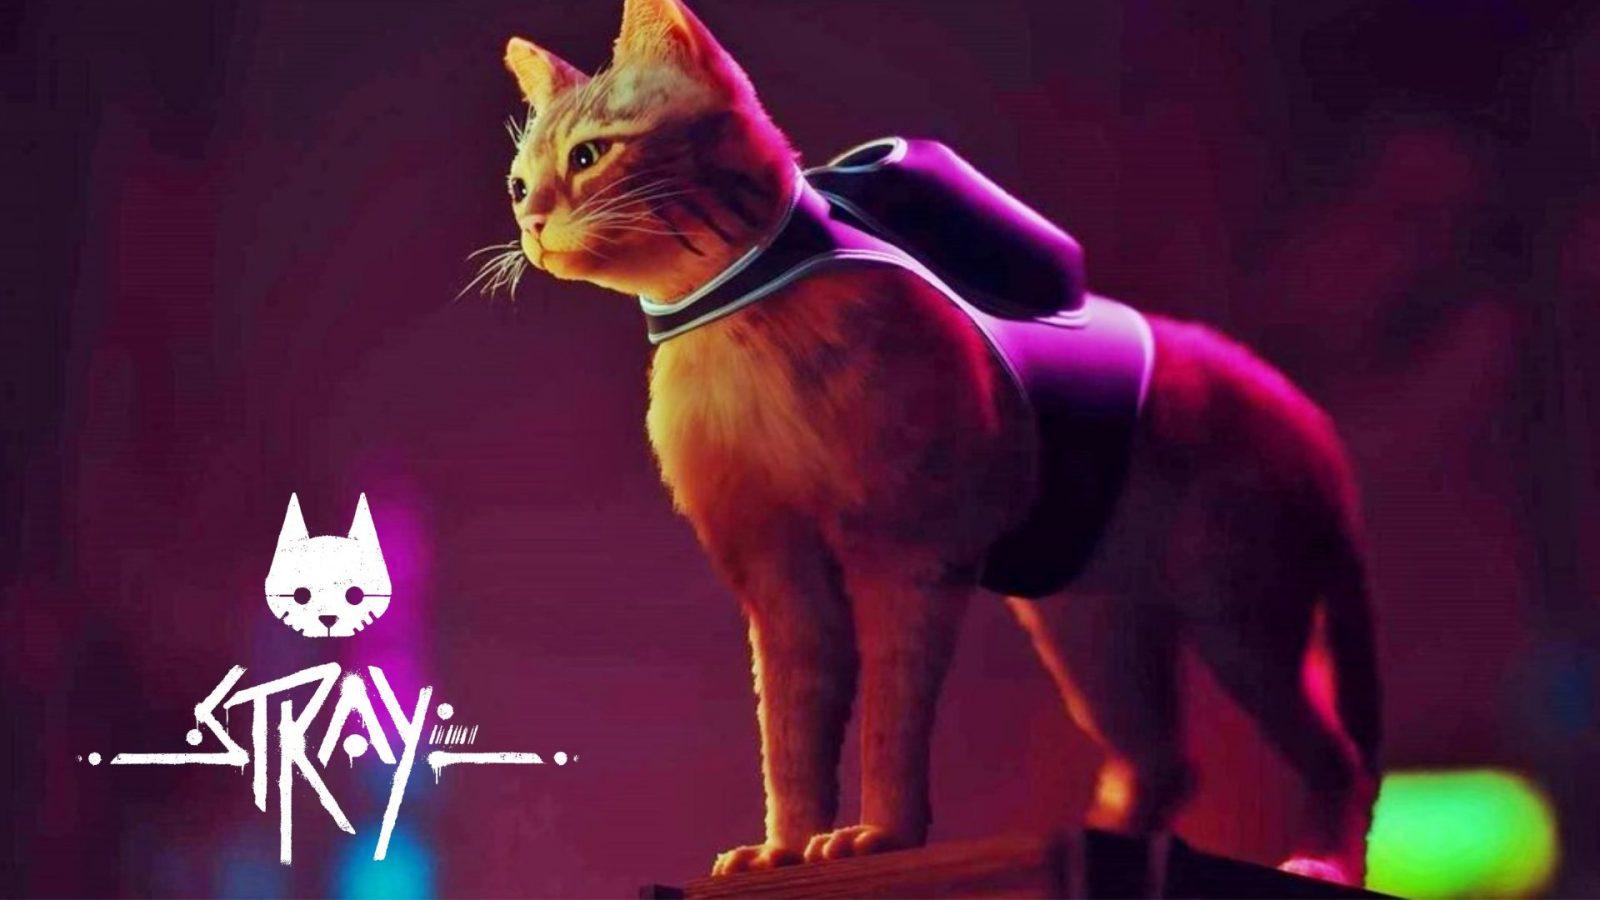 Popular cat game Stray is getting an animated film adaption